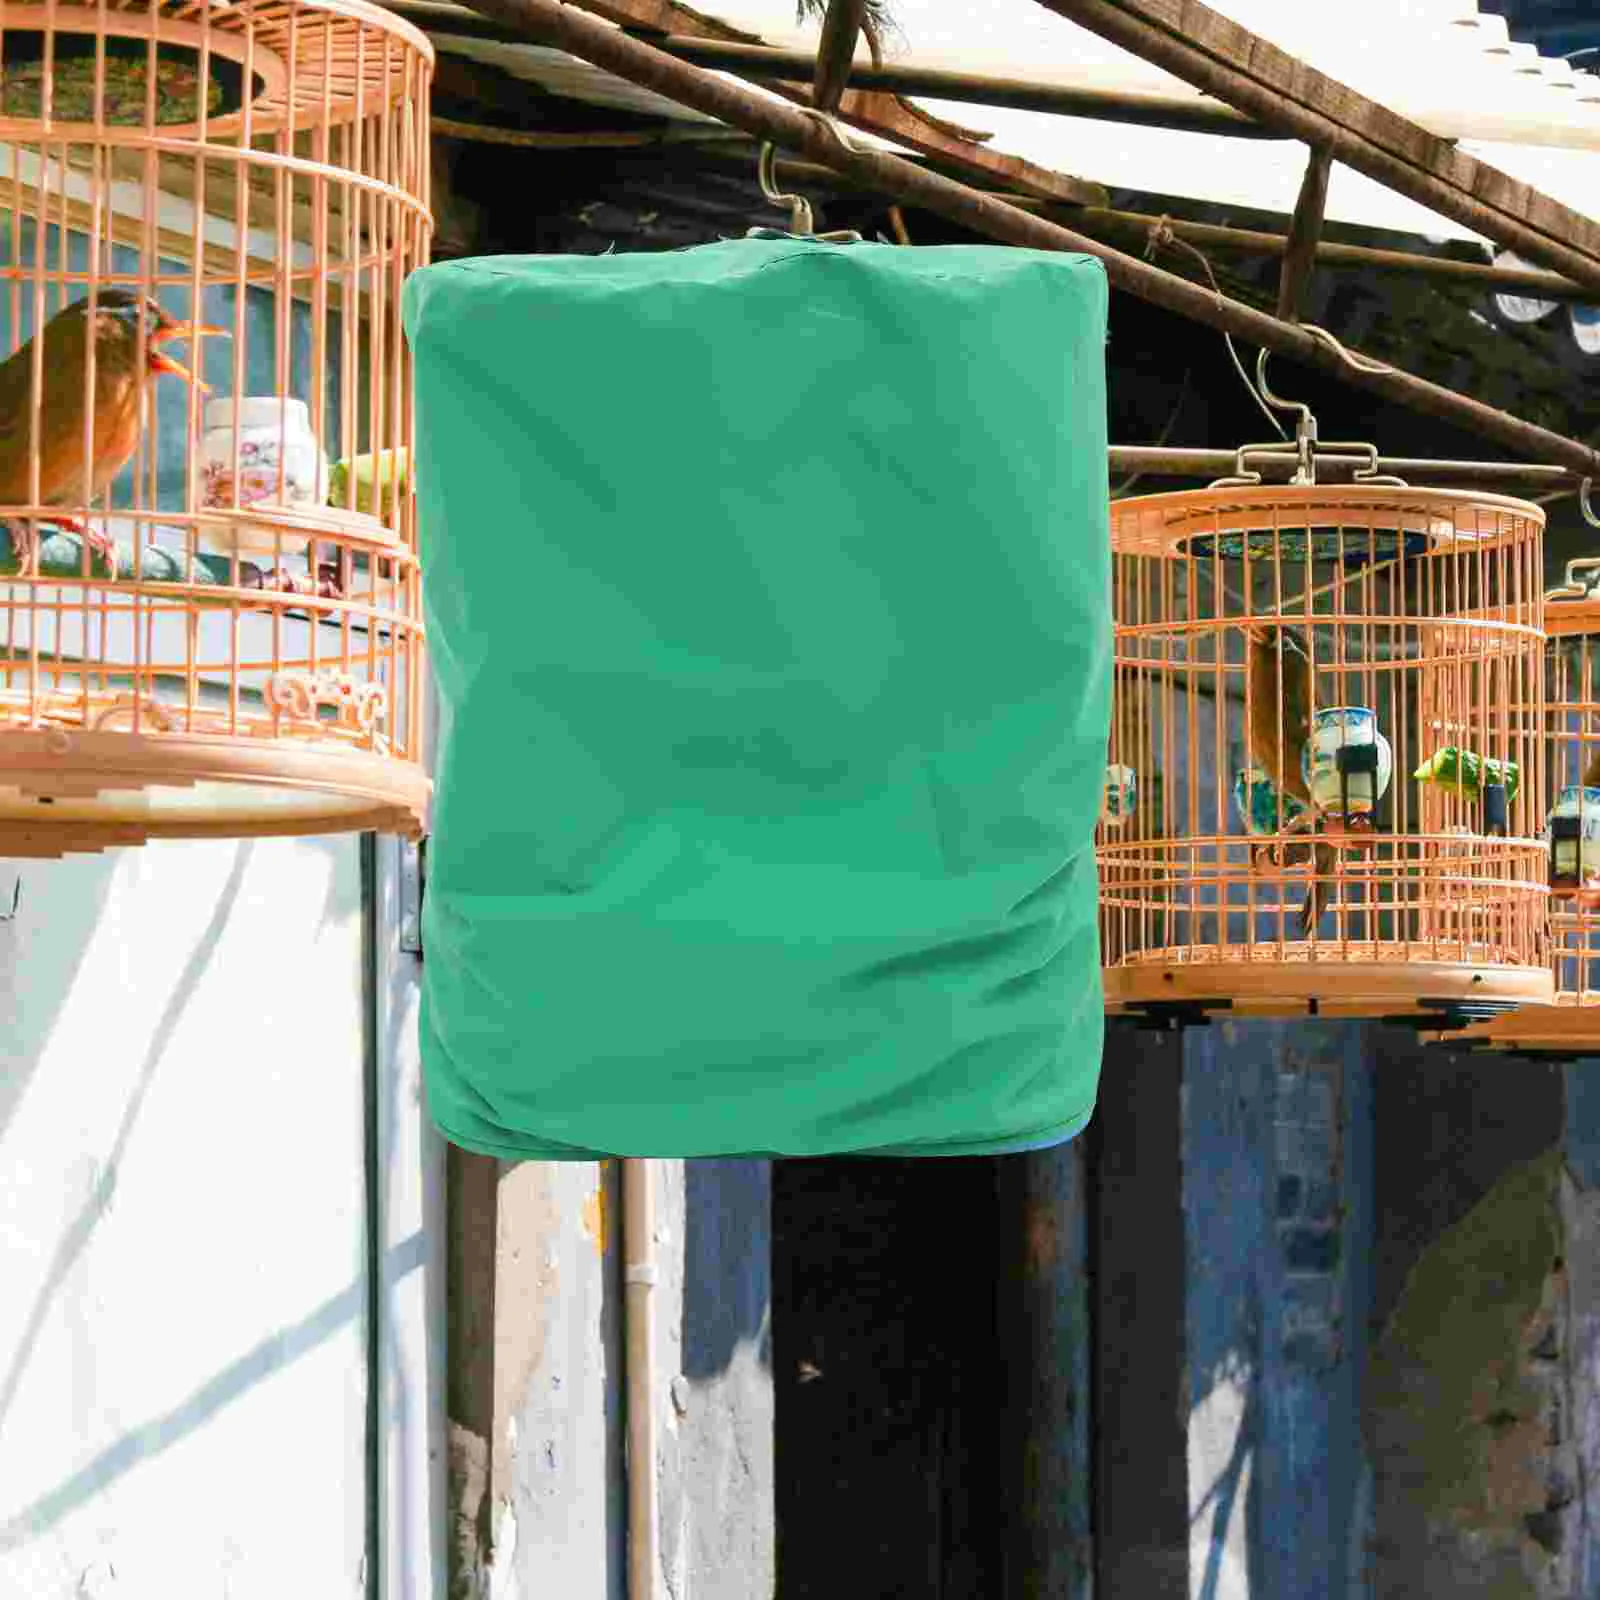 

Bird Cage Covers Large Parrot Cage Cloth Windproof Waterproof Shield Guard Classic Round Dome Bird Cage Cover (Random Birdcage